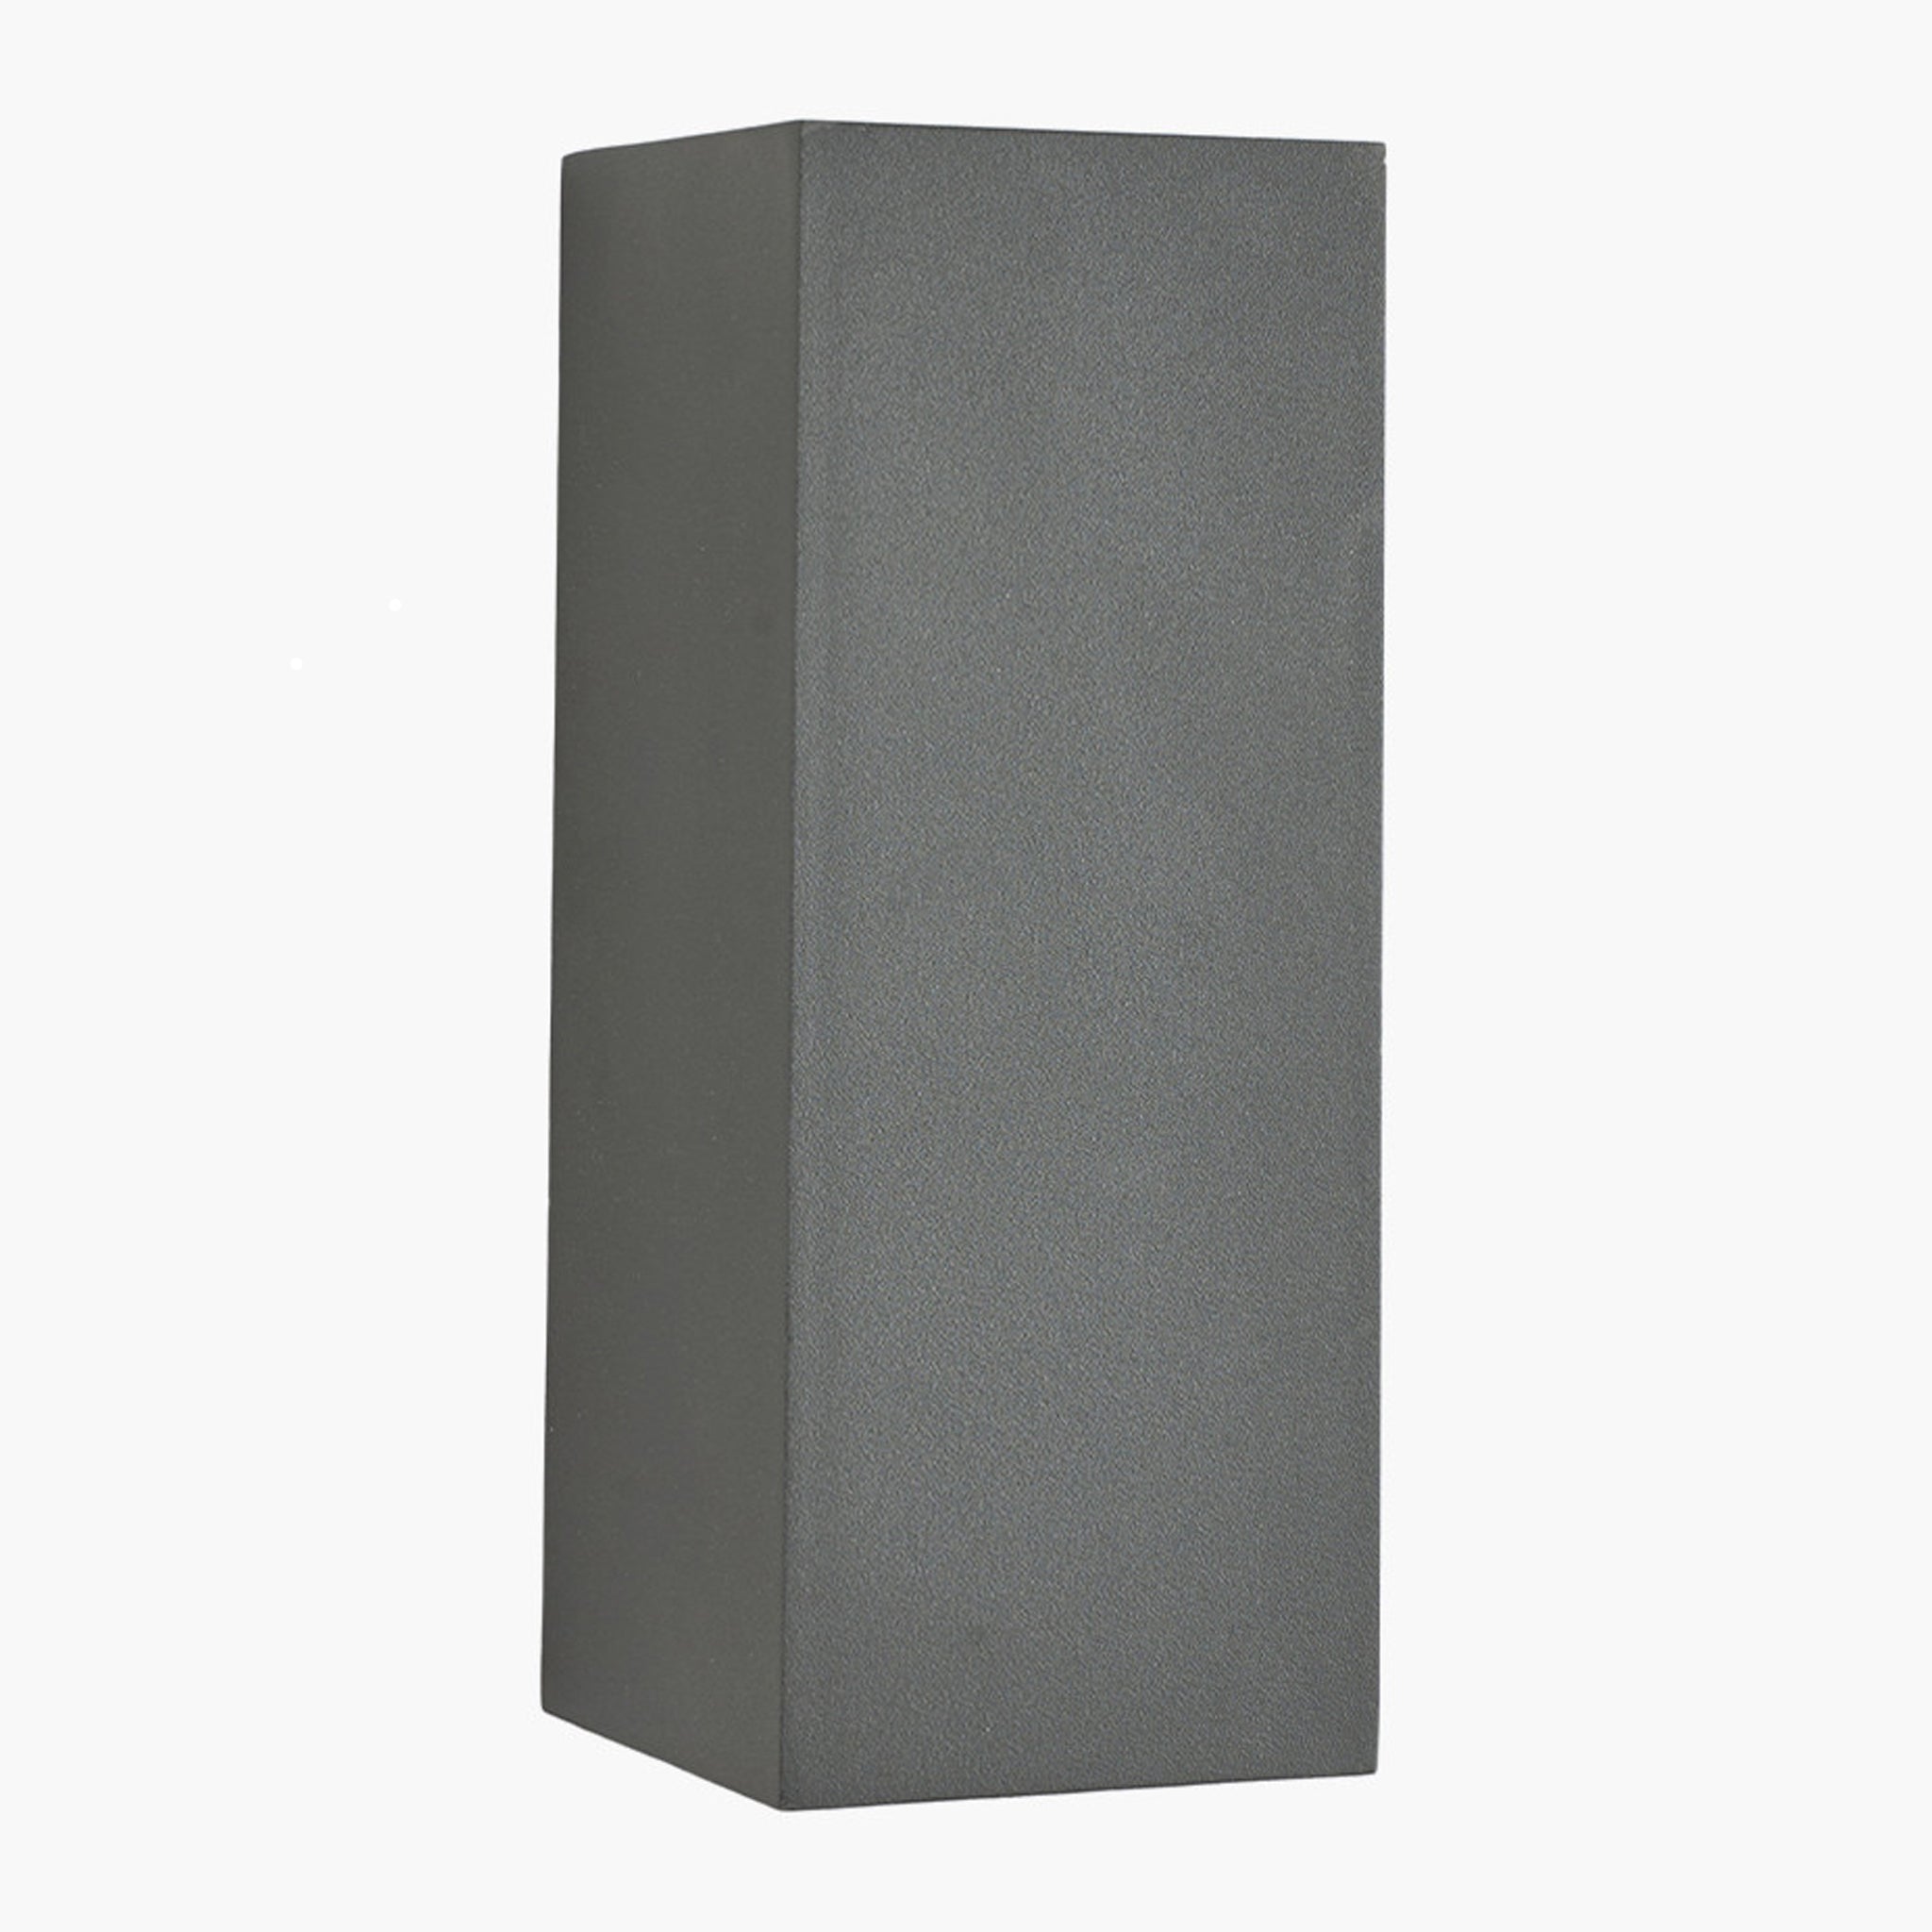 Acer Dark Metal Square Outdoor Dual Wall Light in Grey - Harbour lifestyle